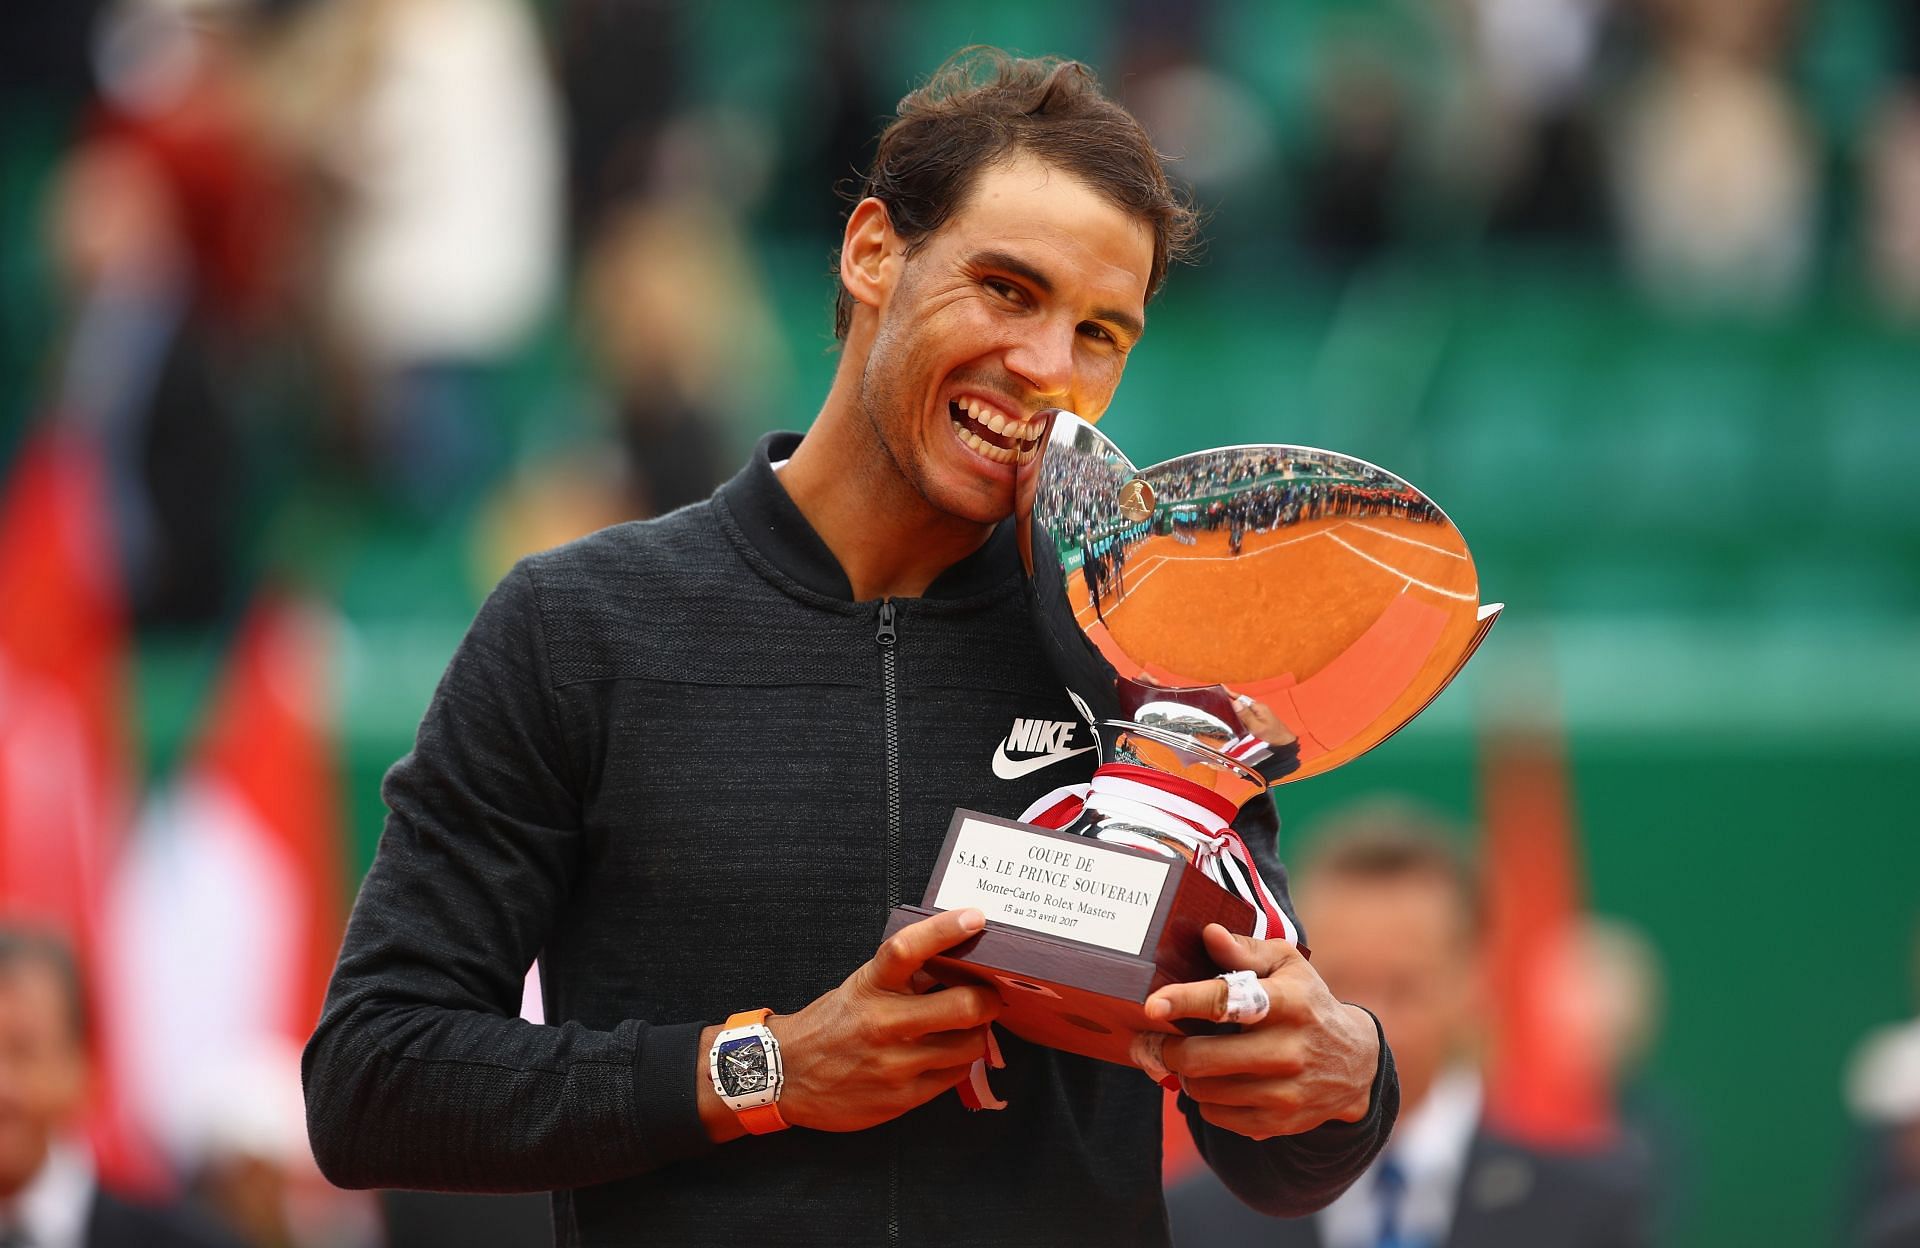 Rafael Nadal is expected to play at the Monte-Carlo Masters up next